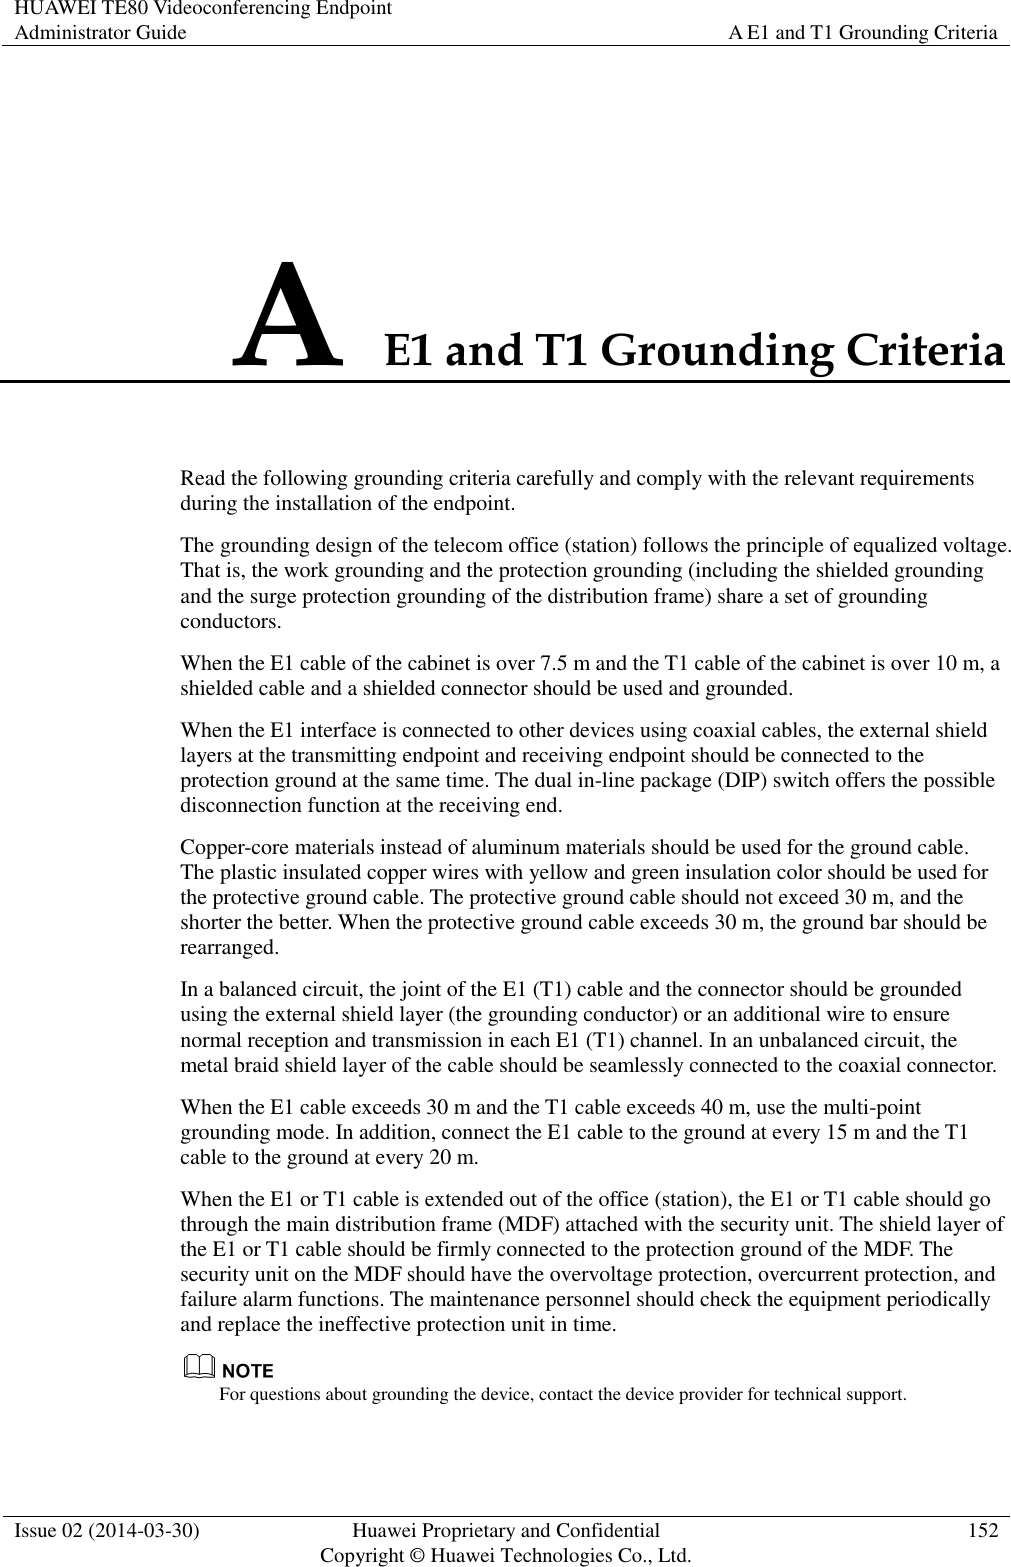 HUAWEI TE80 Videoconferencing Endpoint Administrator Guide A E1 and T1 Grounding Criteria  Issue 02 (2014-03-30) Huawei Proprietary and Confidential Copyright © Huawei Technologies Co., Ltd. 152  A E1 and T1 Grounding Criteria Read the following grounding criteria carefully and comply with the relevant requirements during the installation of the endpoint. The grounding design of the telecom office (station) follows the principle of equalized voltage. That is, the work grounding and the protection grounding (including the shielded grounding and the surge protection grounding of the distribution frame) share a set of grounding conductors. When the E1 cable of the cabinet is over 7.5 m and the T1 cable of the cabinet is over 10 m, a shielded cable and a shielded connector should be used and grounded. When the E1 interface is connected to other devices using coaxial cables, the external shield layers at the transmitting endpoint and receiving endpoint should be connected to the protection ground at the same time. The dual in-line package (DIP) switch offers the possible disconnection function at the receiving end. Copper-core materials instead of aluminum materials should be used for the ground cable. The plastic insulated copper wires with yellow and green insulation color should be used for the protective ground cable. The protective ground cable should not exceed 30 m, and the shorter the better. When the protective ground cable exceeds 30 m, the ground bar should be rearranged. In a balanced circuit, the joint of the E1 (T1) cable and the connector should be grounded using the external shield layer (the grounding conductor) or an additional wire to ensure normal reception and transmission in each E1 (T1) channel. In an unbalanced circuit, the metal braid shield layer of the cable should be seamlessly connected to the coaxial connector. When the E1 cable exceeds 30 m and the T1 cable exceeds 40 m, use the multi-point grounding mode. In addition, connect the E1 cable to the ground at every 15 m and the T1 cable to the ground at every 20 m. When the E1 or T1 cable is extended out of the office (station), the E1 or T1 cable should go through the main distribution frame (MDF) attached with the security unit. The shield layer of the E1 or T1 cable should be firmly connected to the protection ground of the MDF. The security unit on the MDF should have the overvoltage protection, overcurrent protection, and failure alarm functions. The maintenance personnel should check the equipment periodically and replace the ineffective protection unit in time.  For questions about grounding the device, contact the device provider for technical support. 